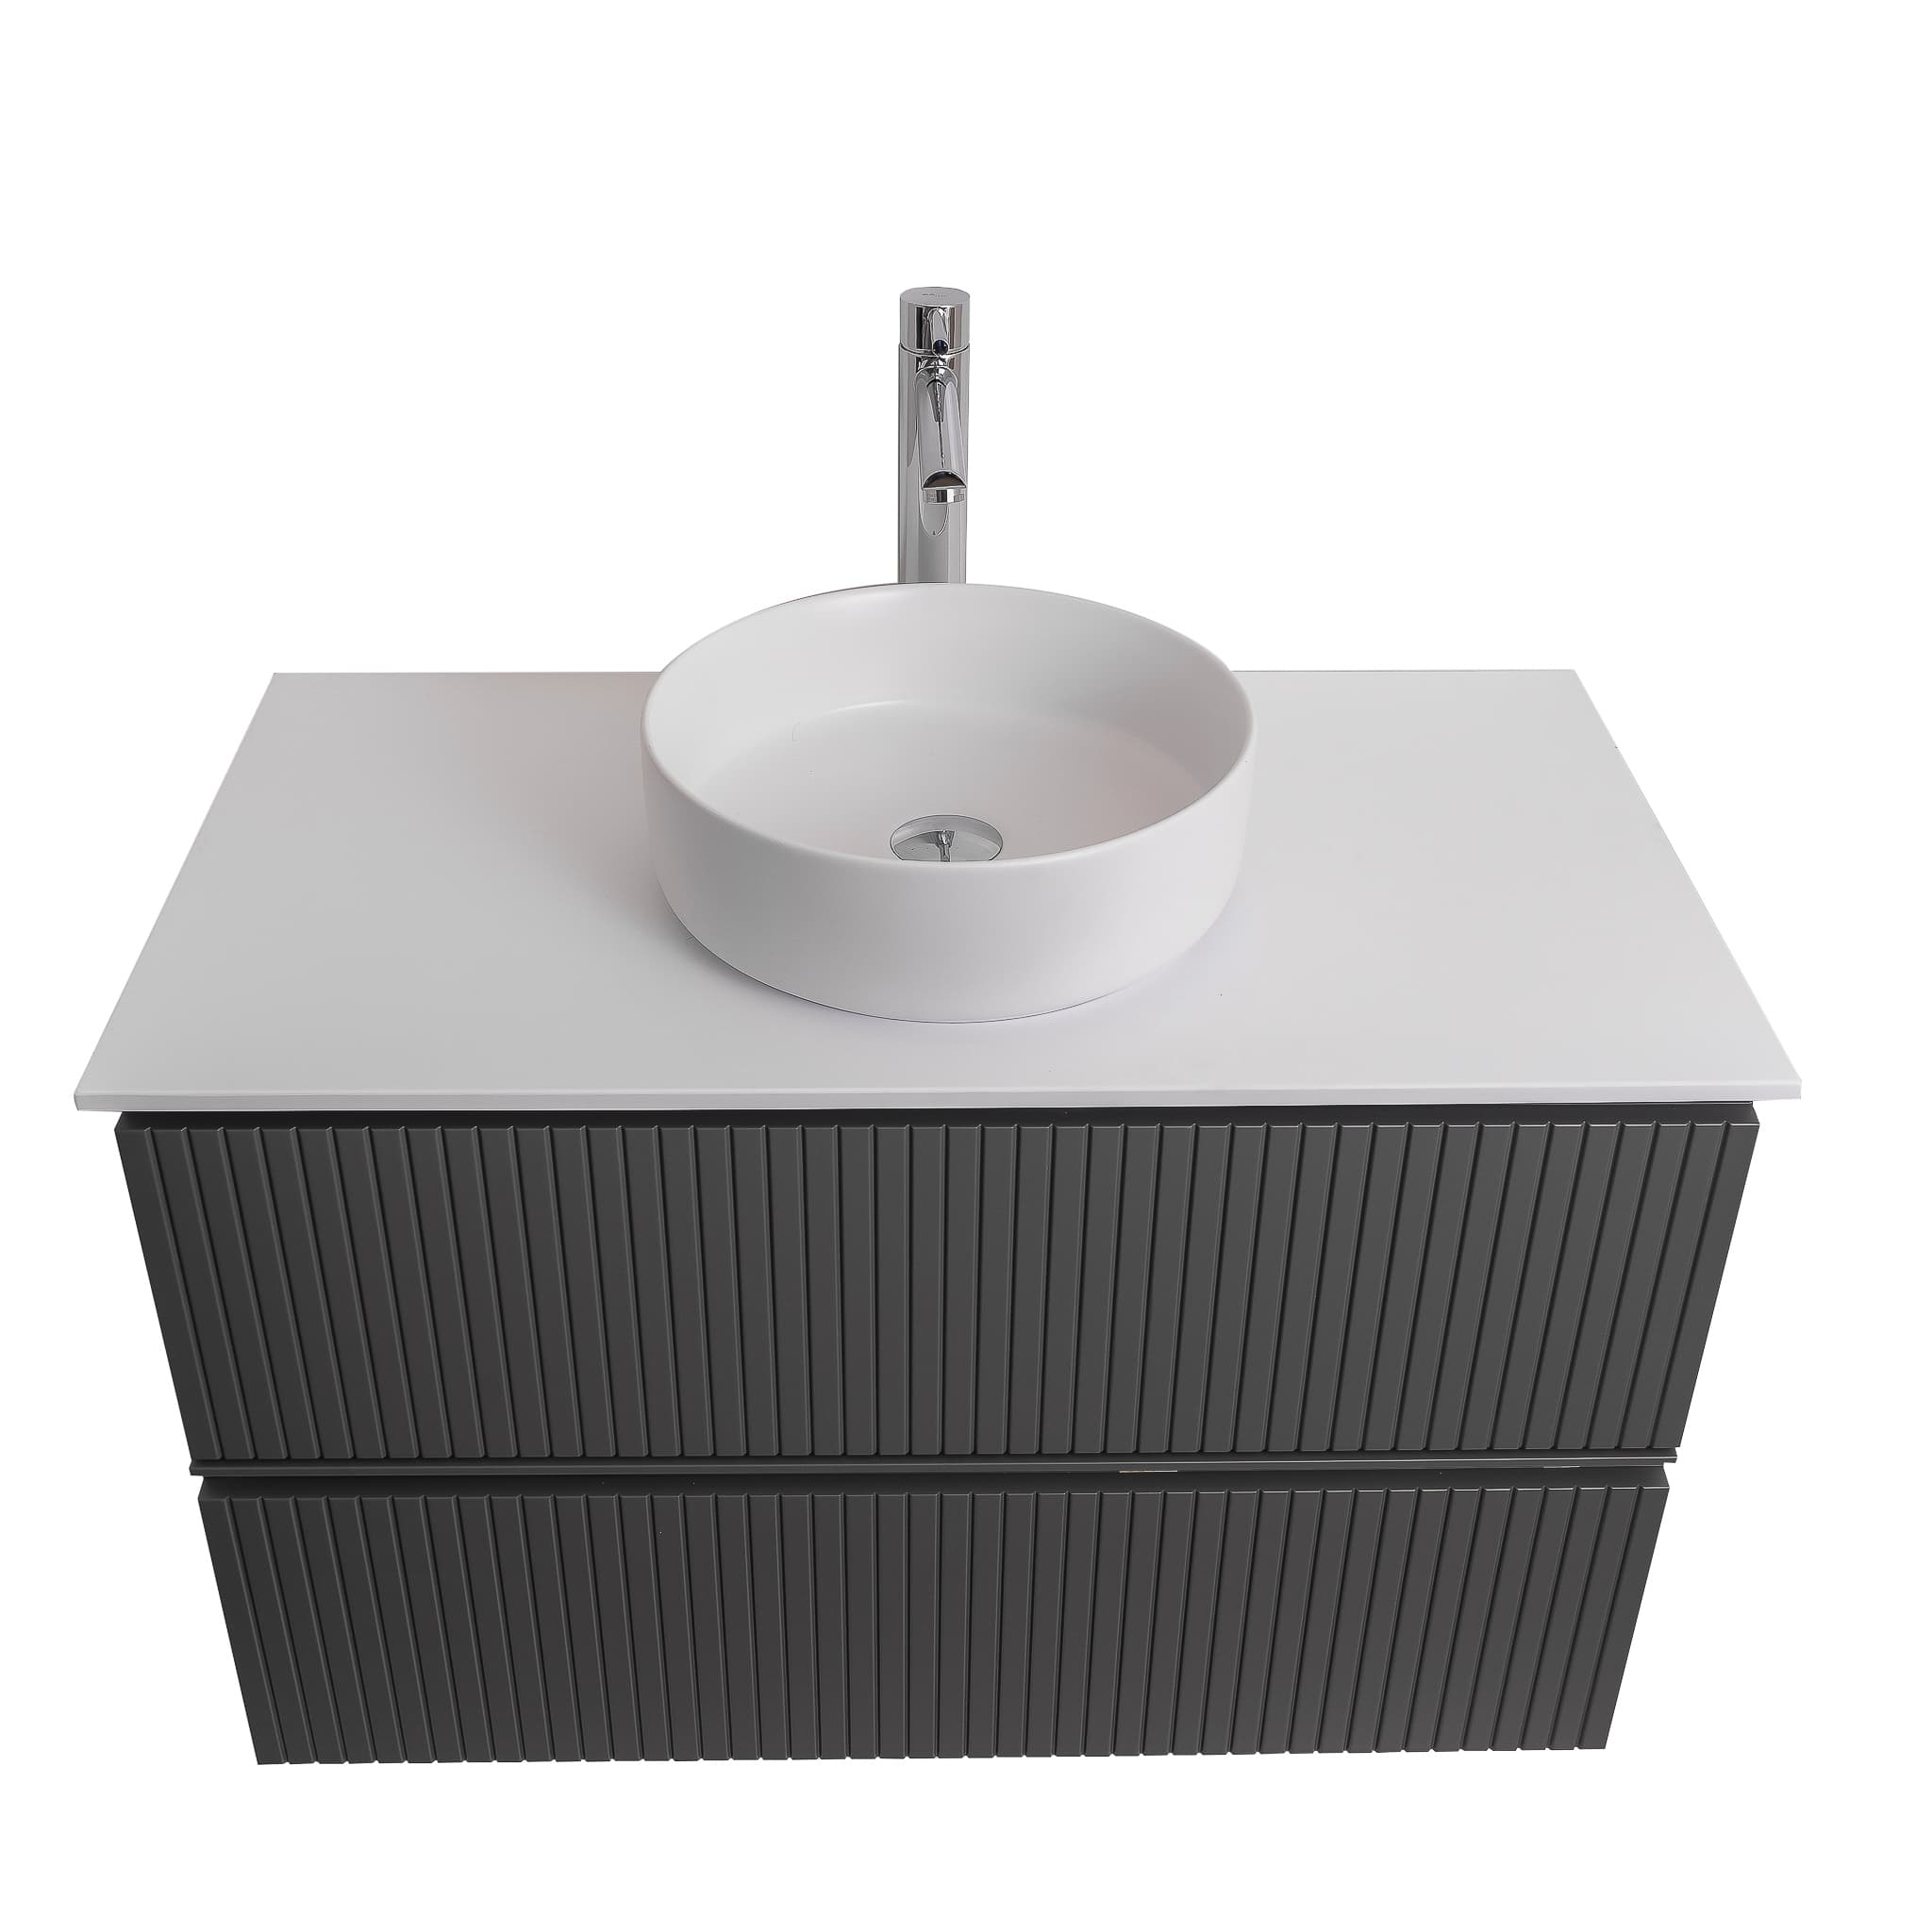 Ares 35.5 Matte Grey Cabinet, Ares White Top And Ares White Ceramic Basin, Wall Mounted Modern Vanity Set